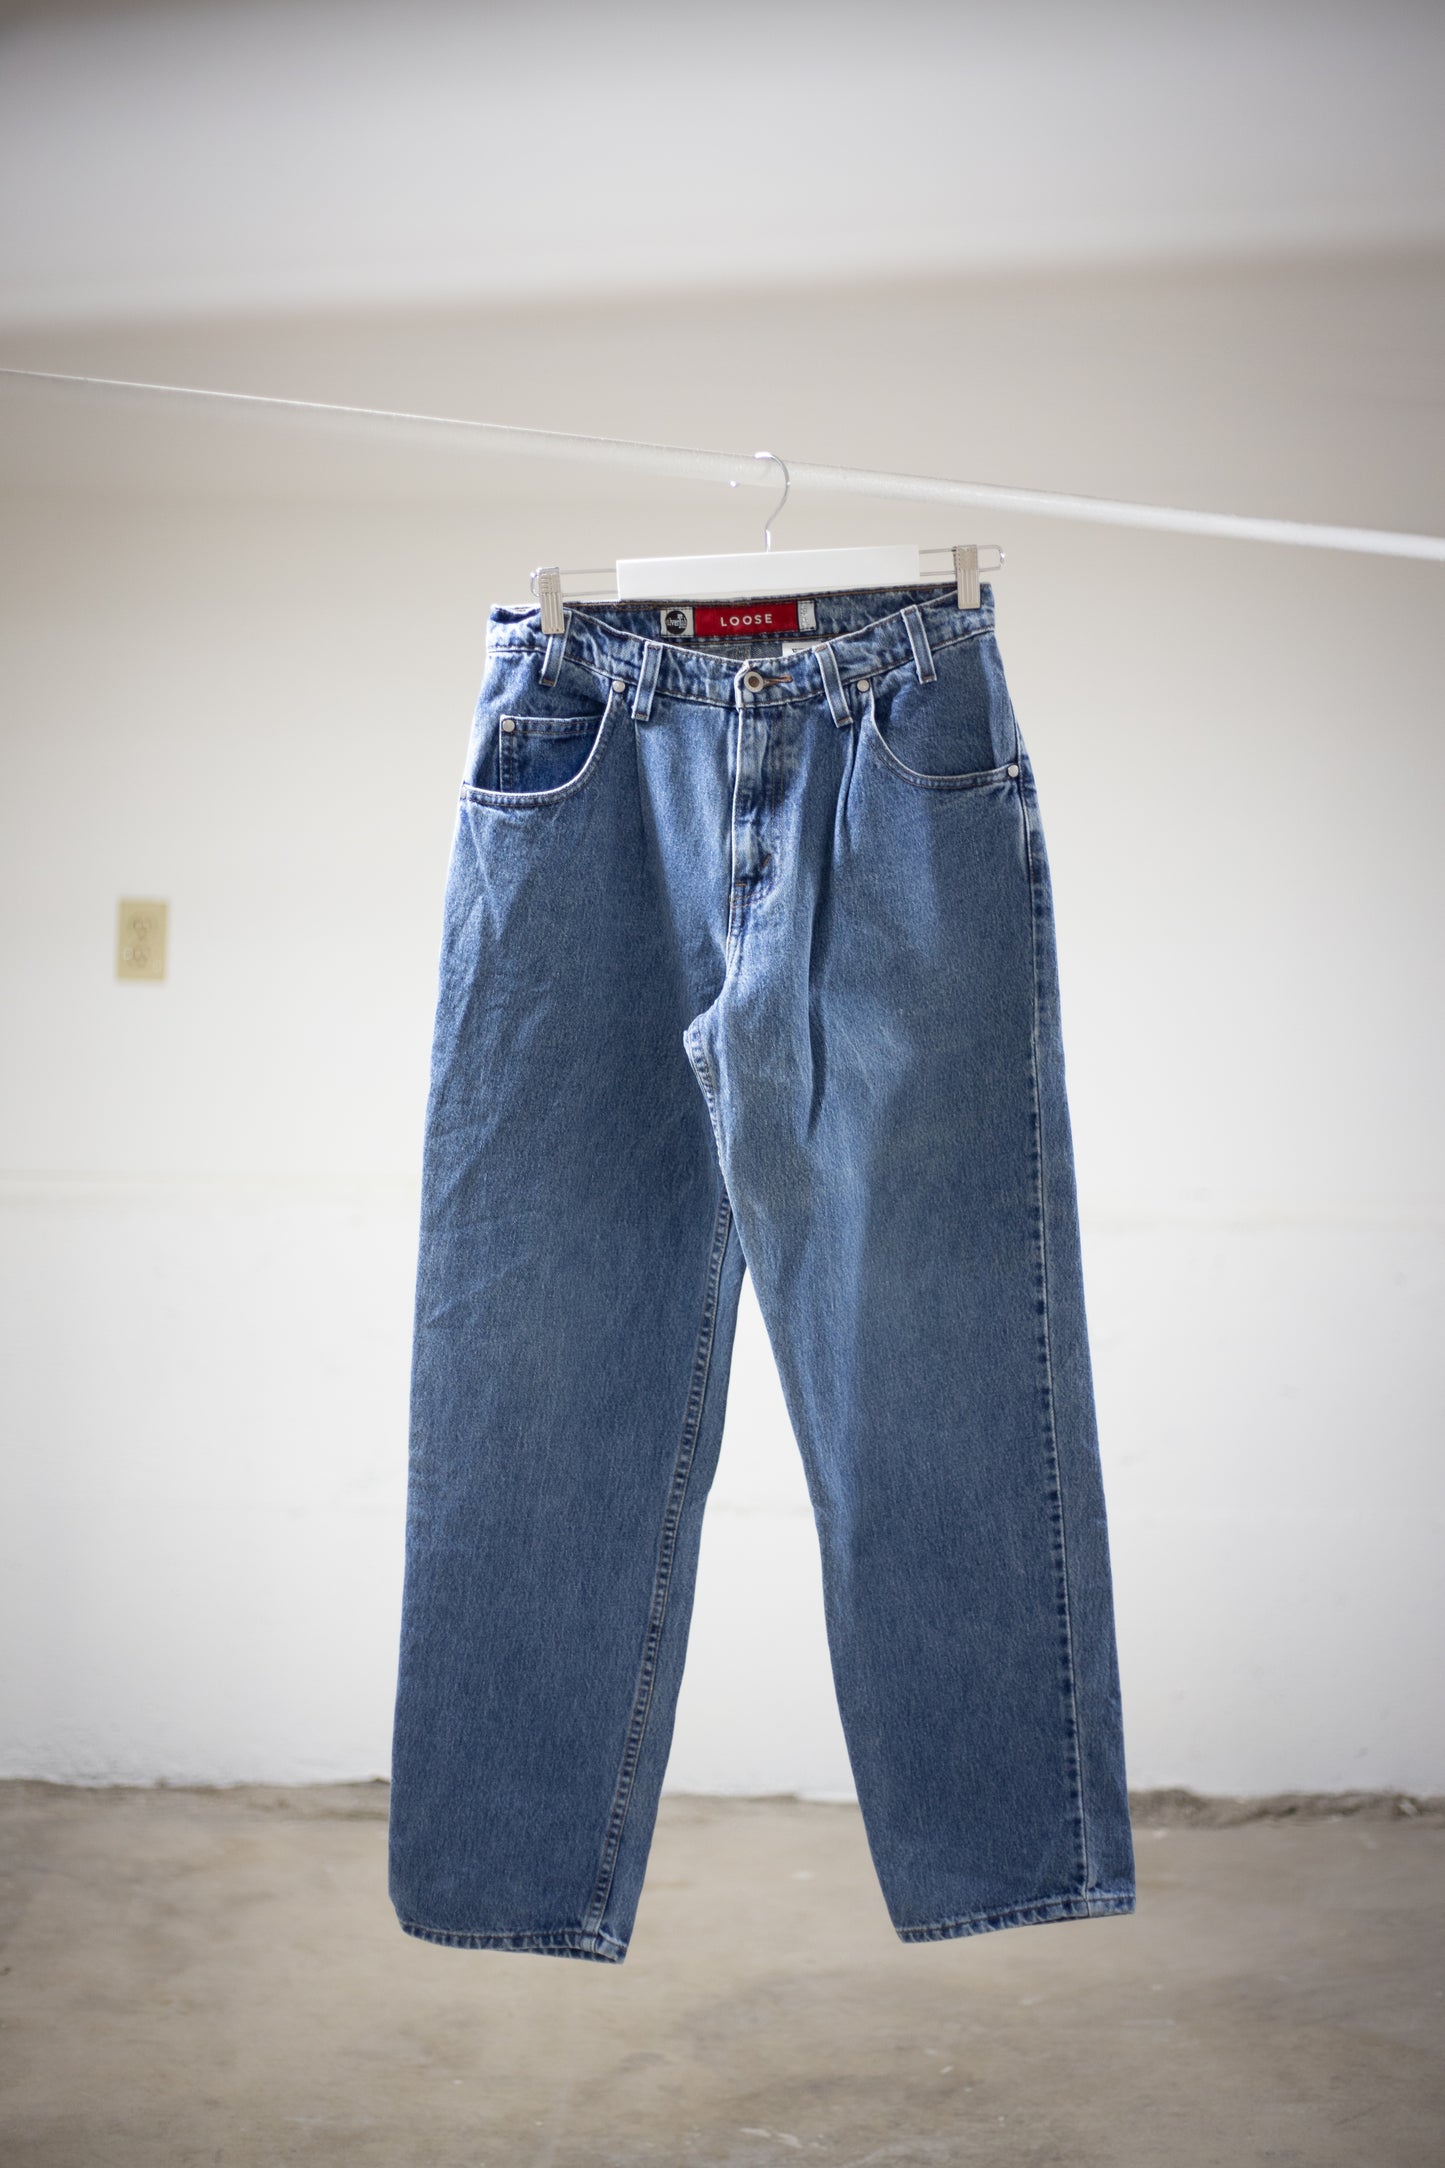 90's Levi's SilverTab (977 0797) Loose Jeans